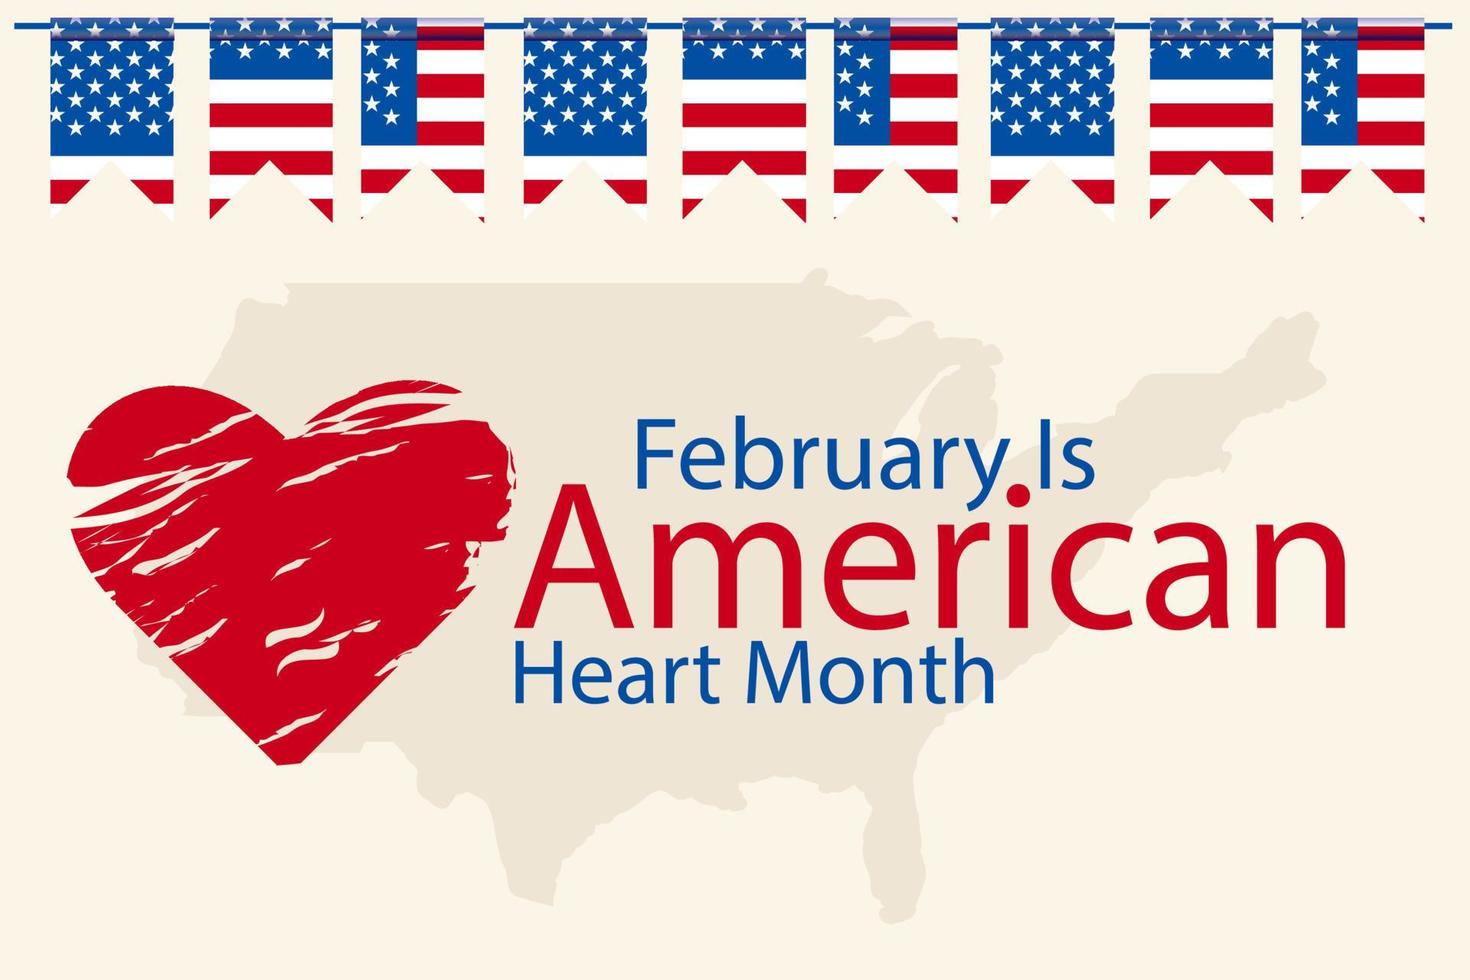 february is american heart month, suitable for banner, background, vector illustration